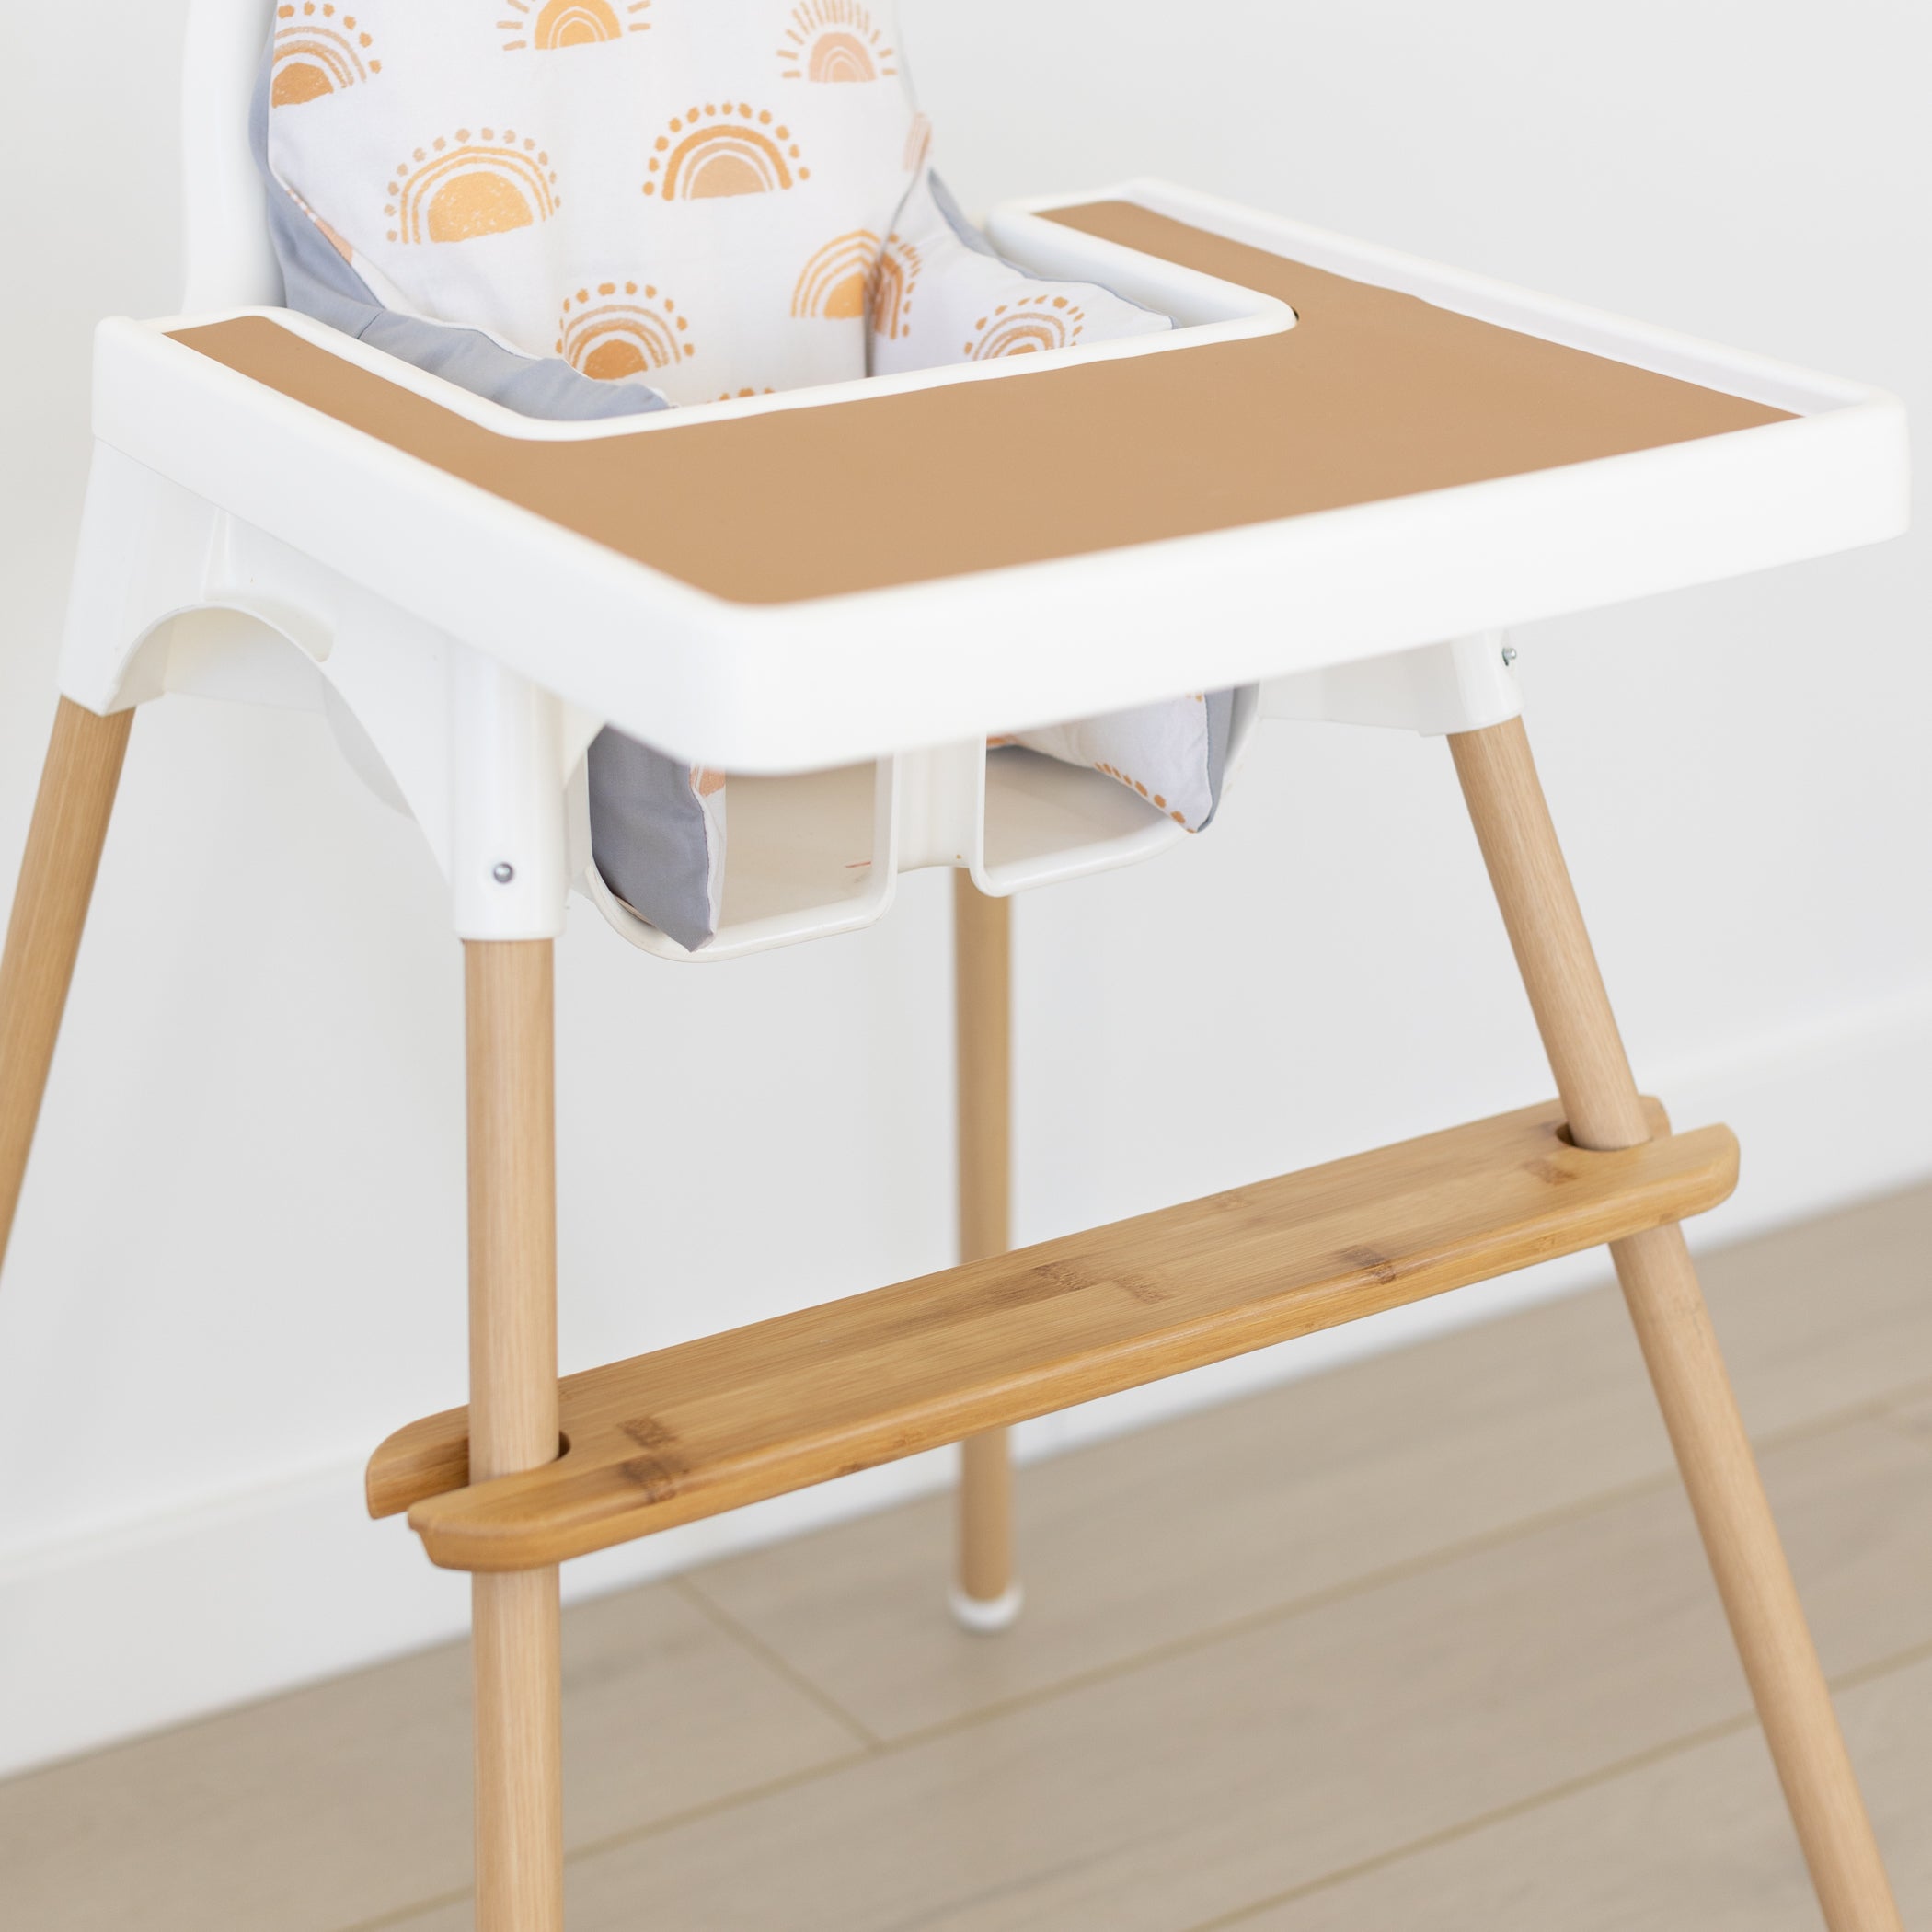 High Chair Footrest, Natural Bamboo Wooden Footrest Compatible with IKEA  Antilop High Chairs Accessories, Adjustable HighChair Foot Rest